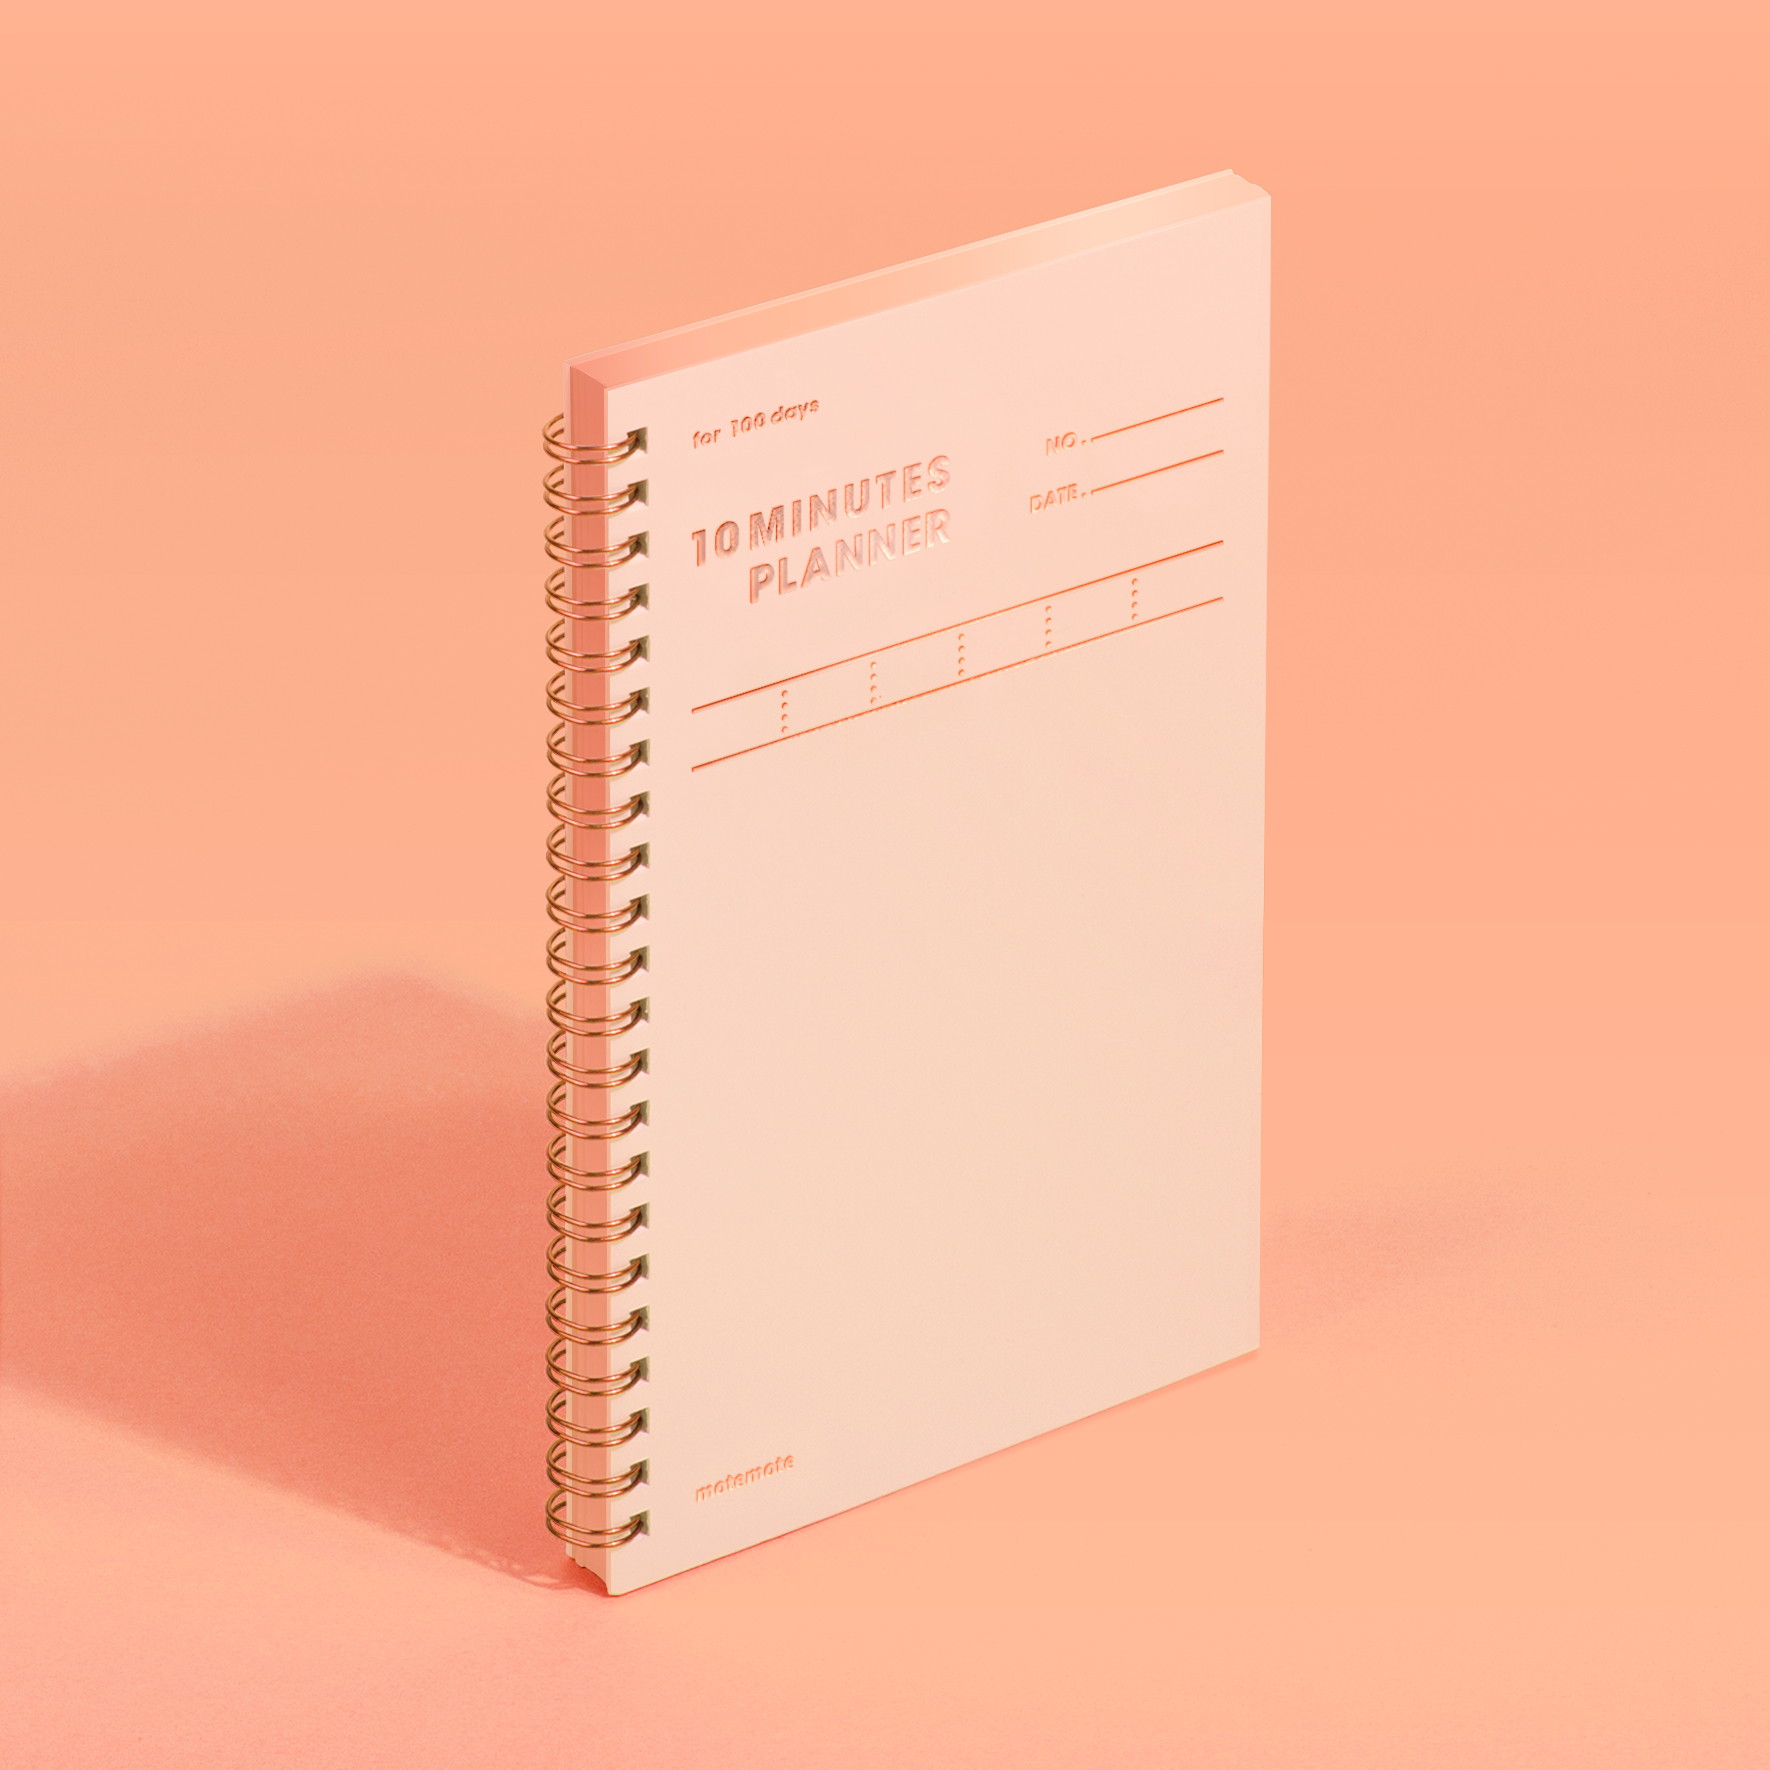 10minutes planner for 100days_shine peach